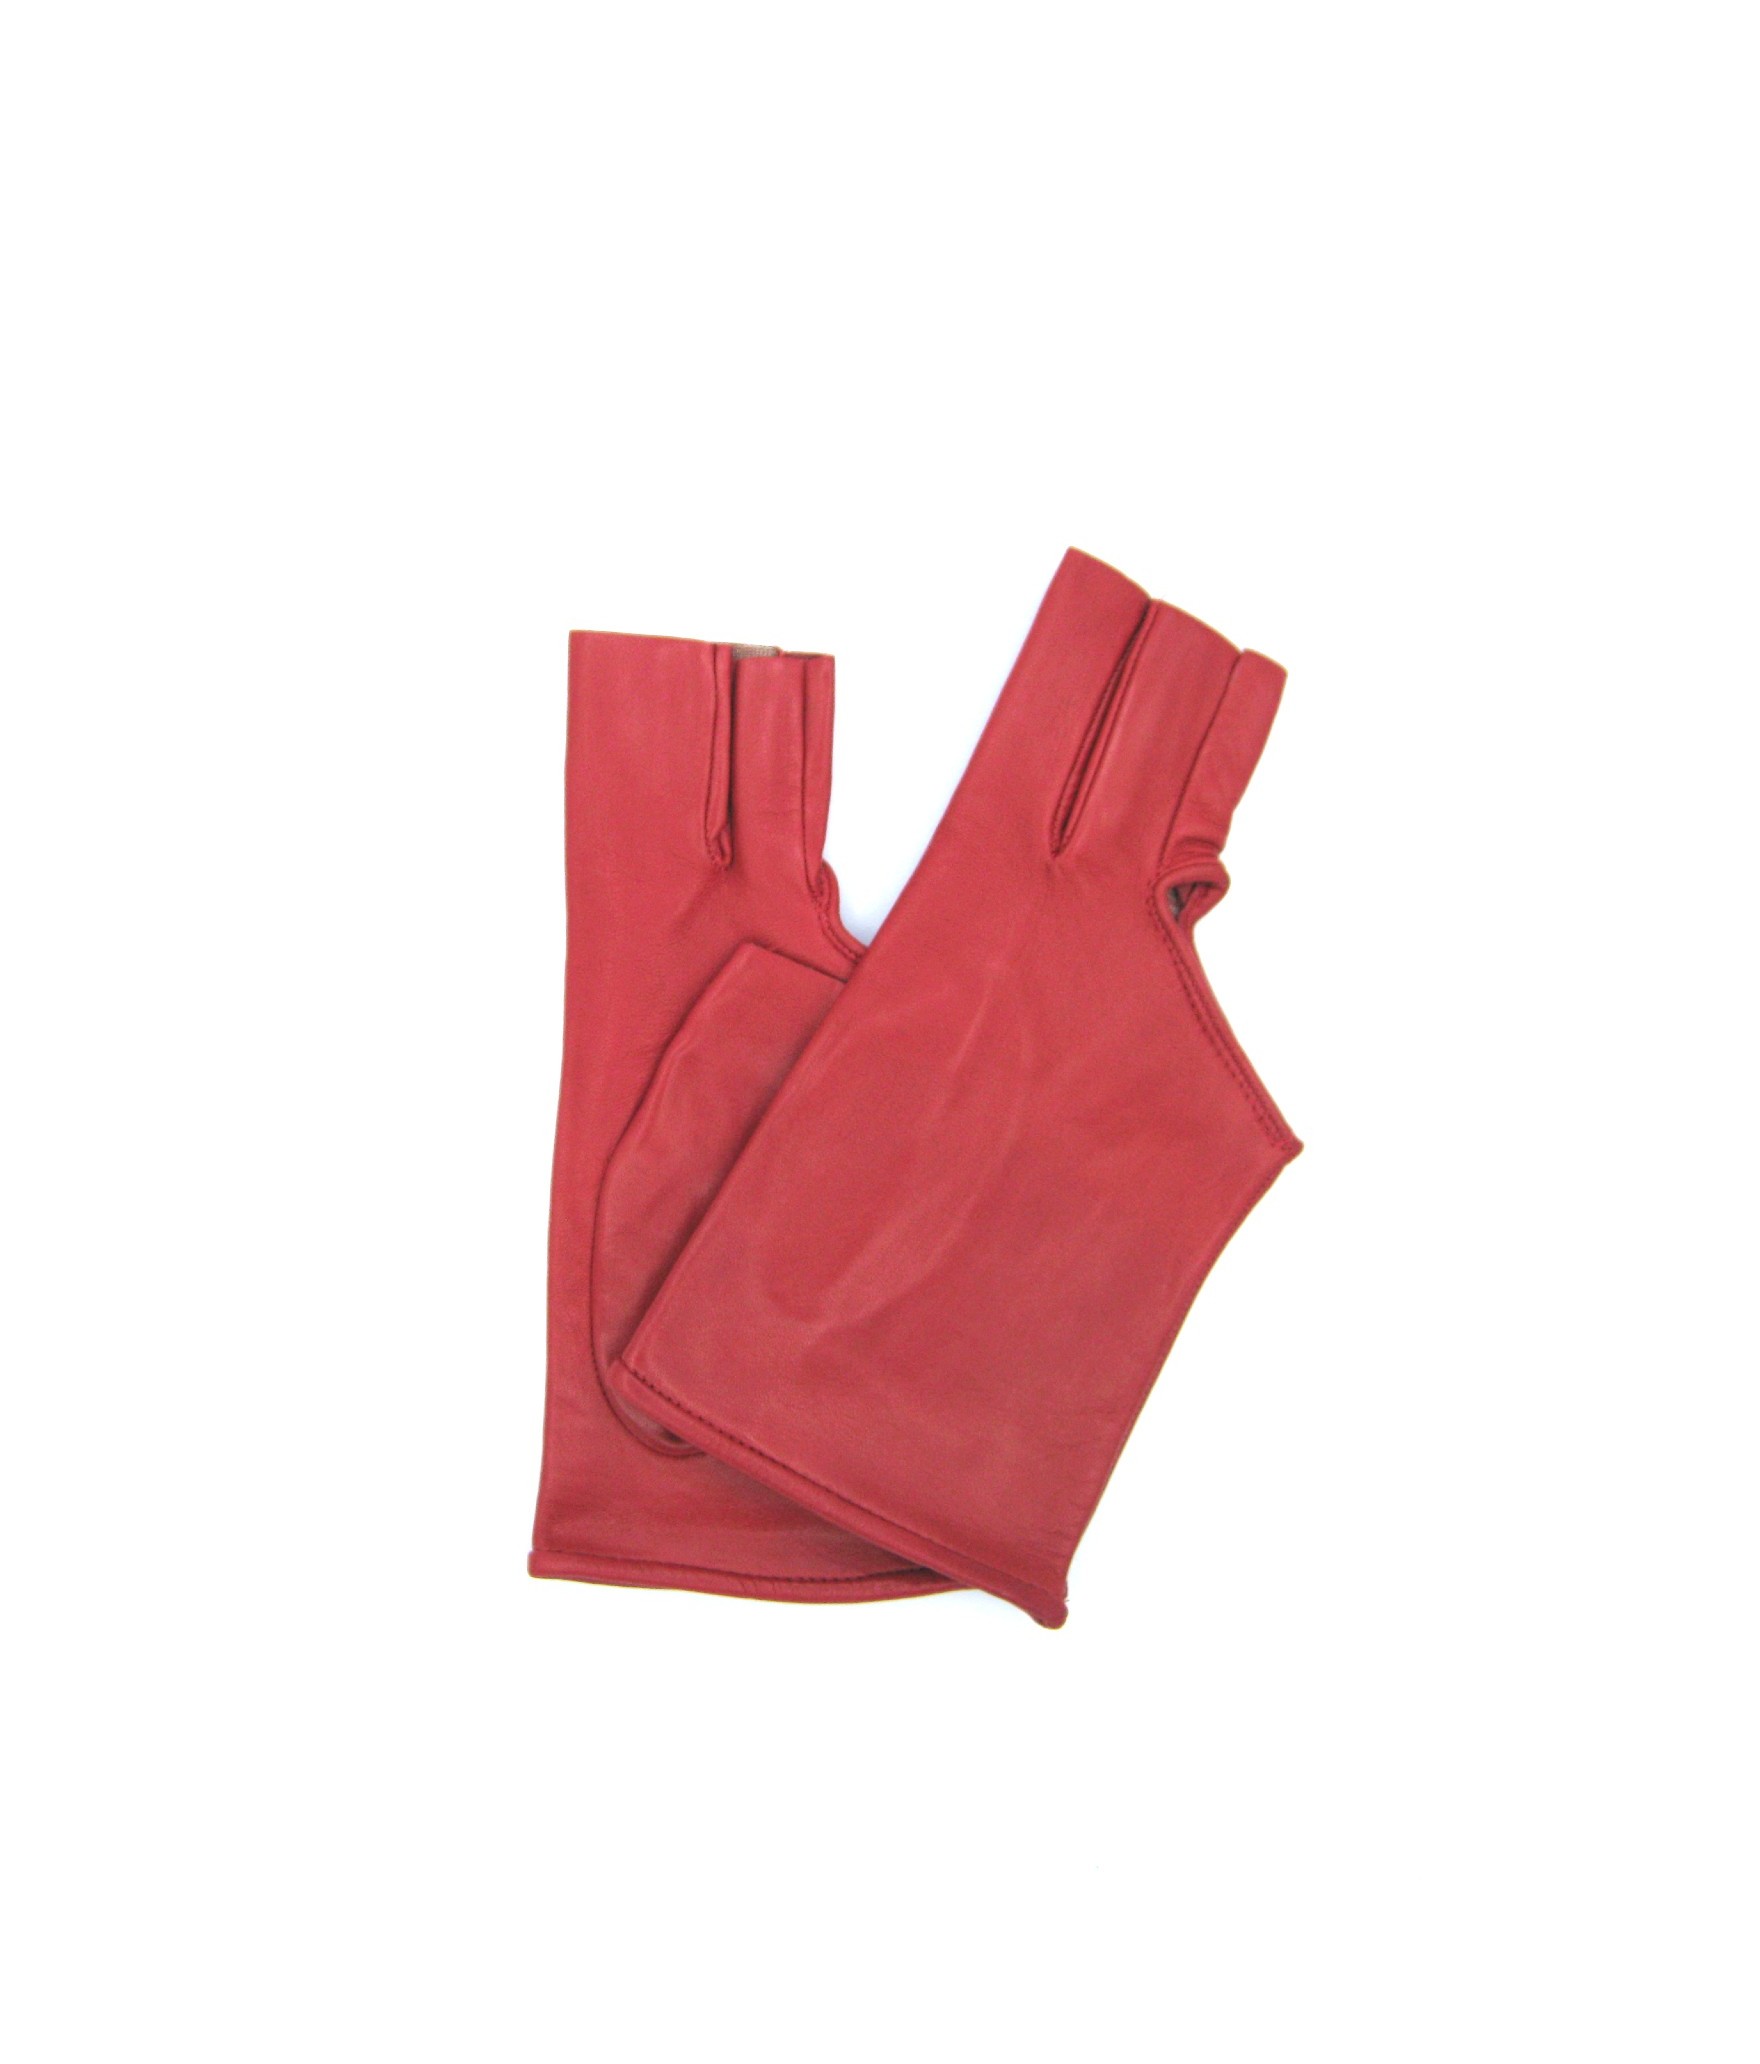 Woman Fashion Nappa leather gloves with three fingers,silk